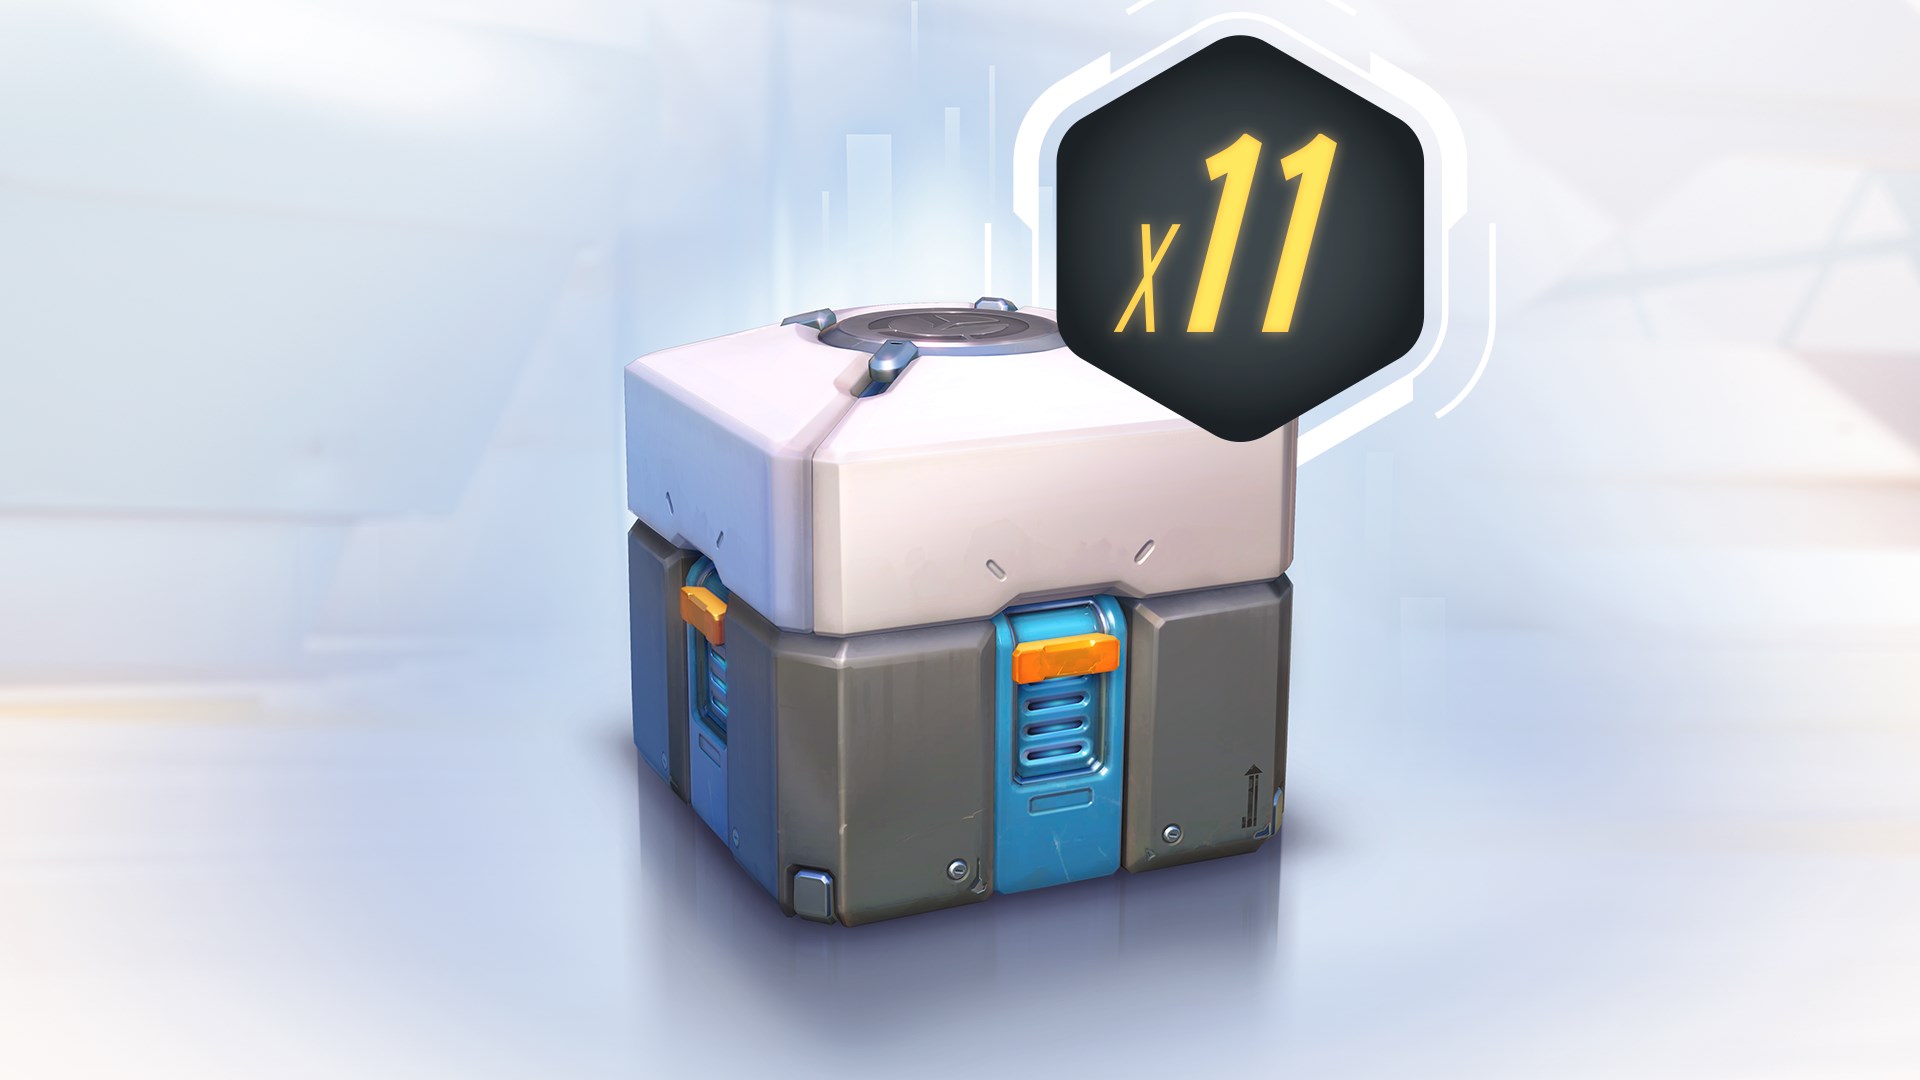 Overwatch - 11 Loot Boxes